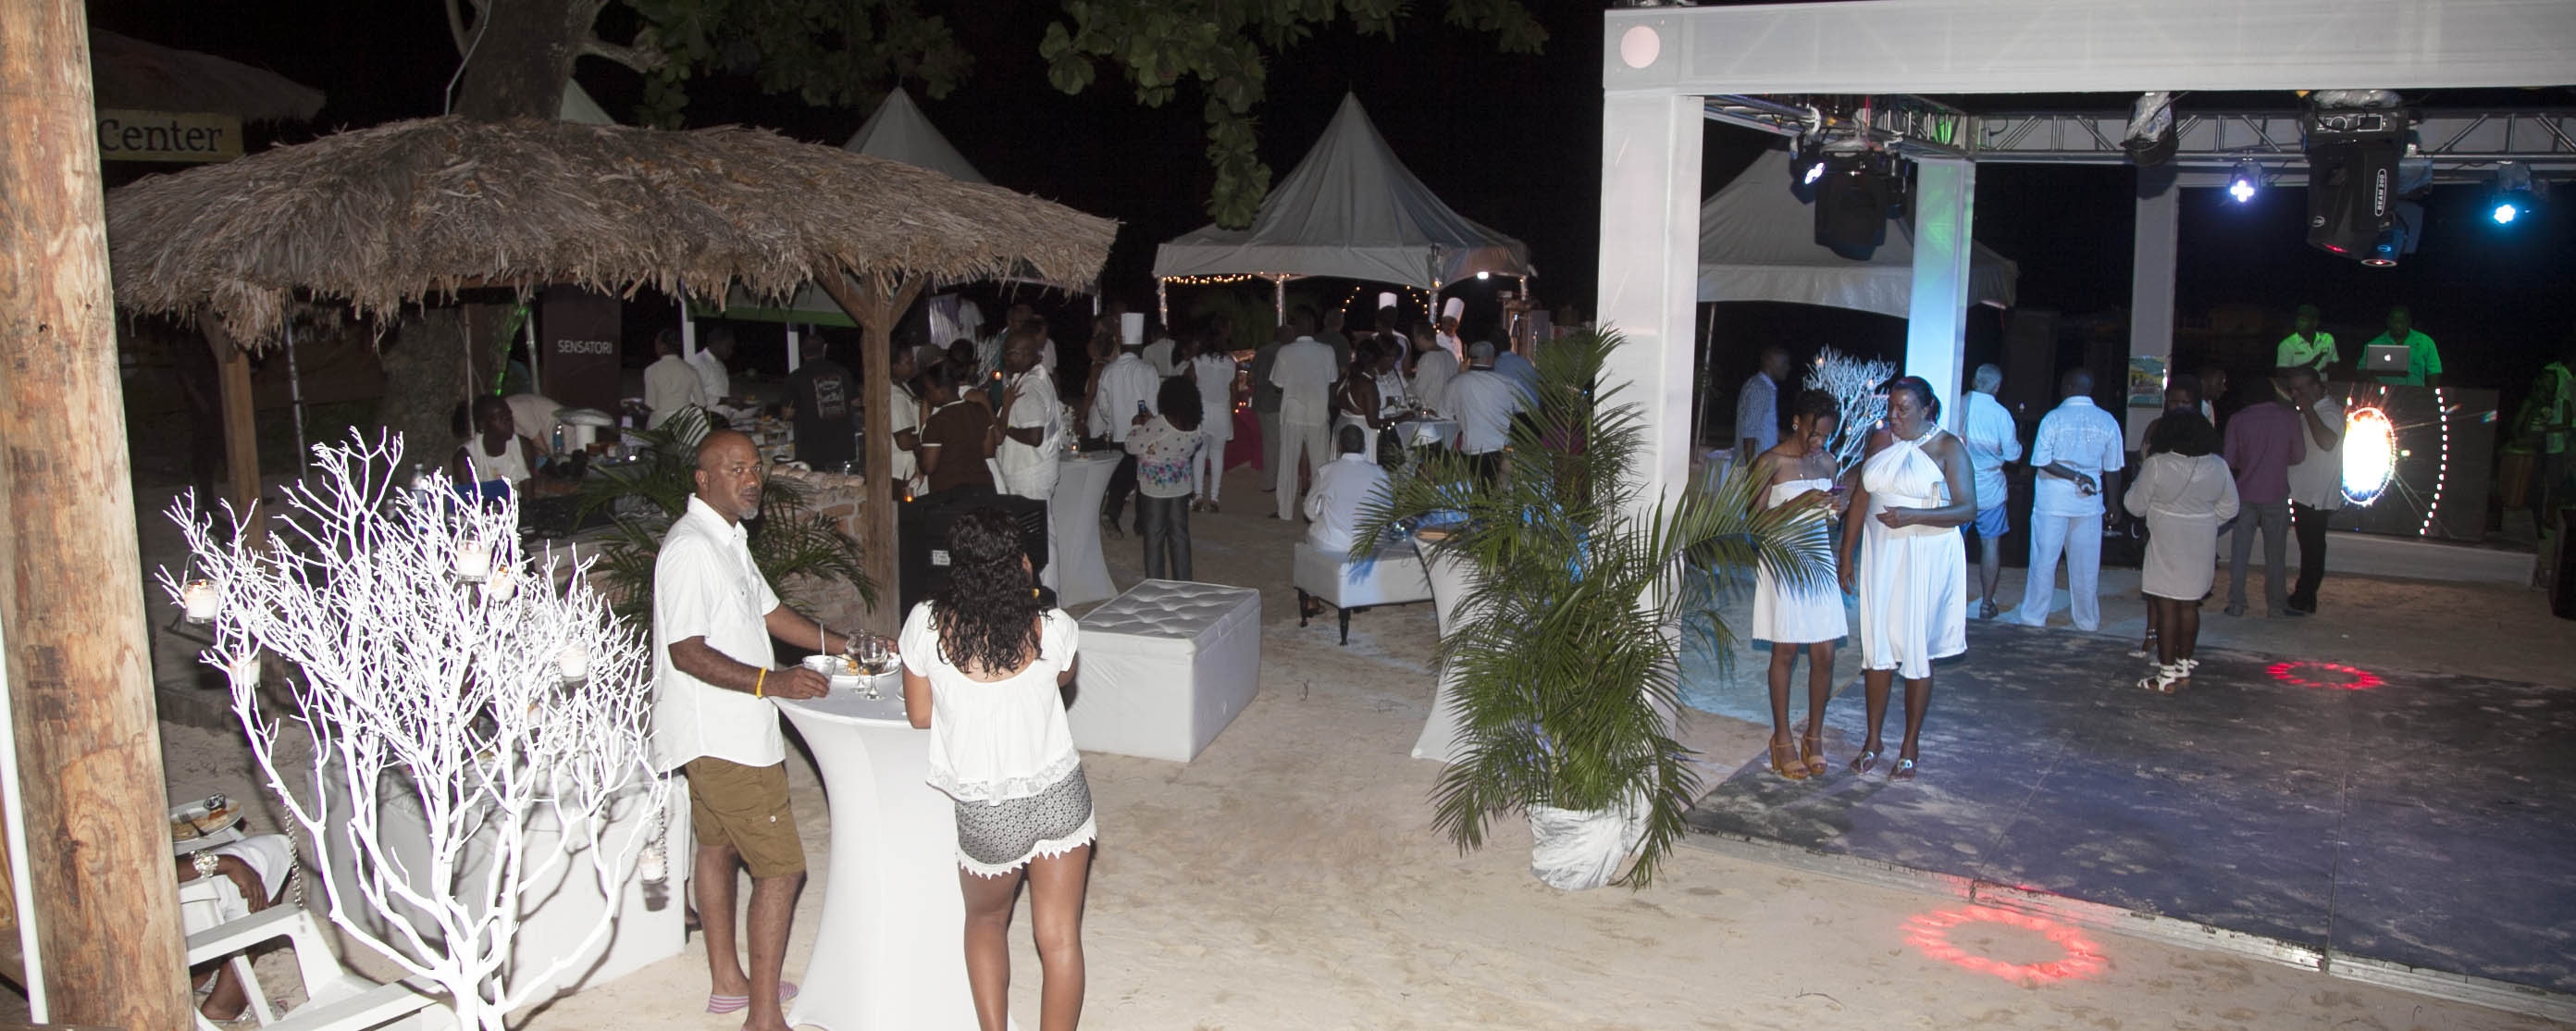 NCC International Food and Wine Event 2016, Negril Jamaica